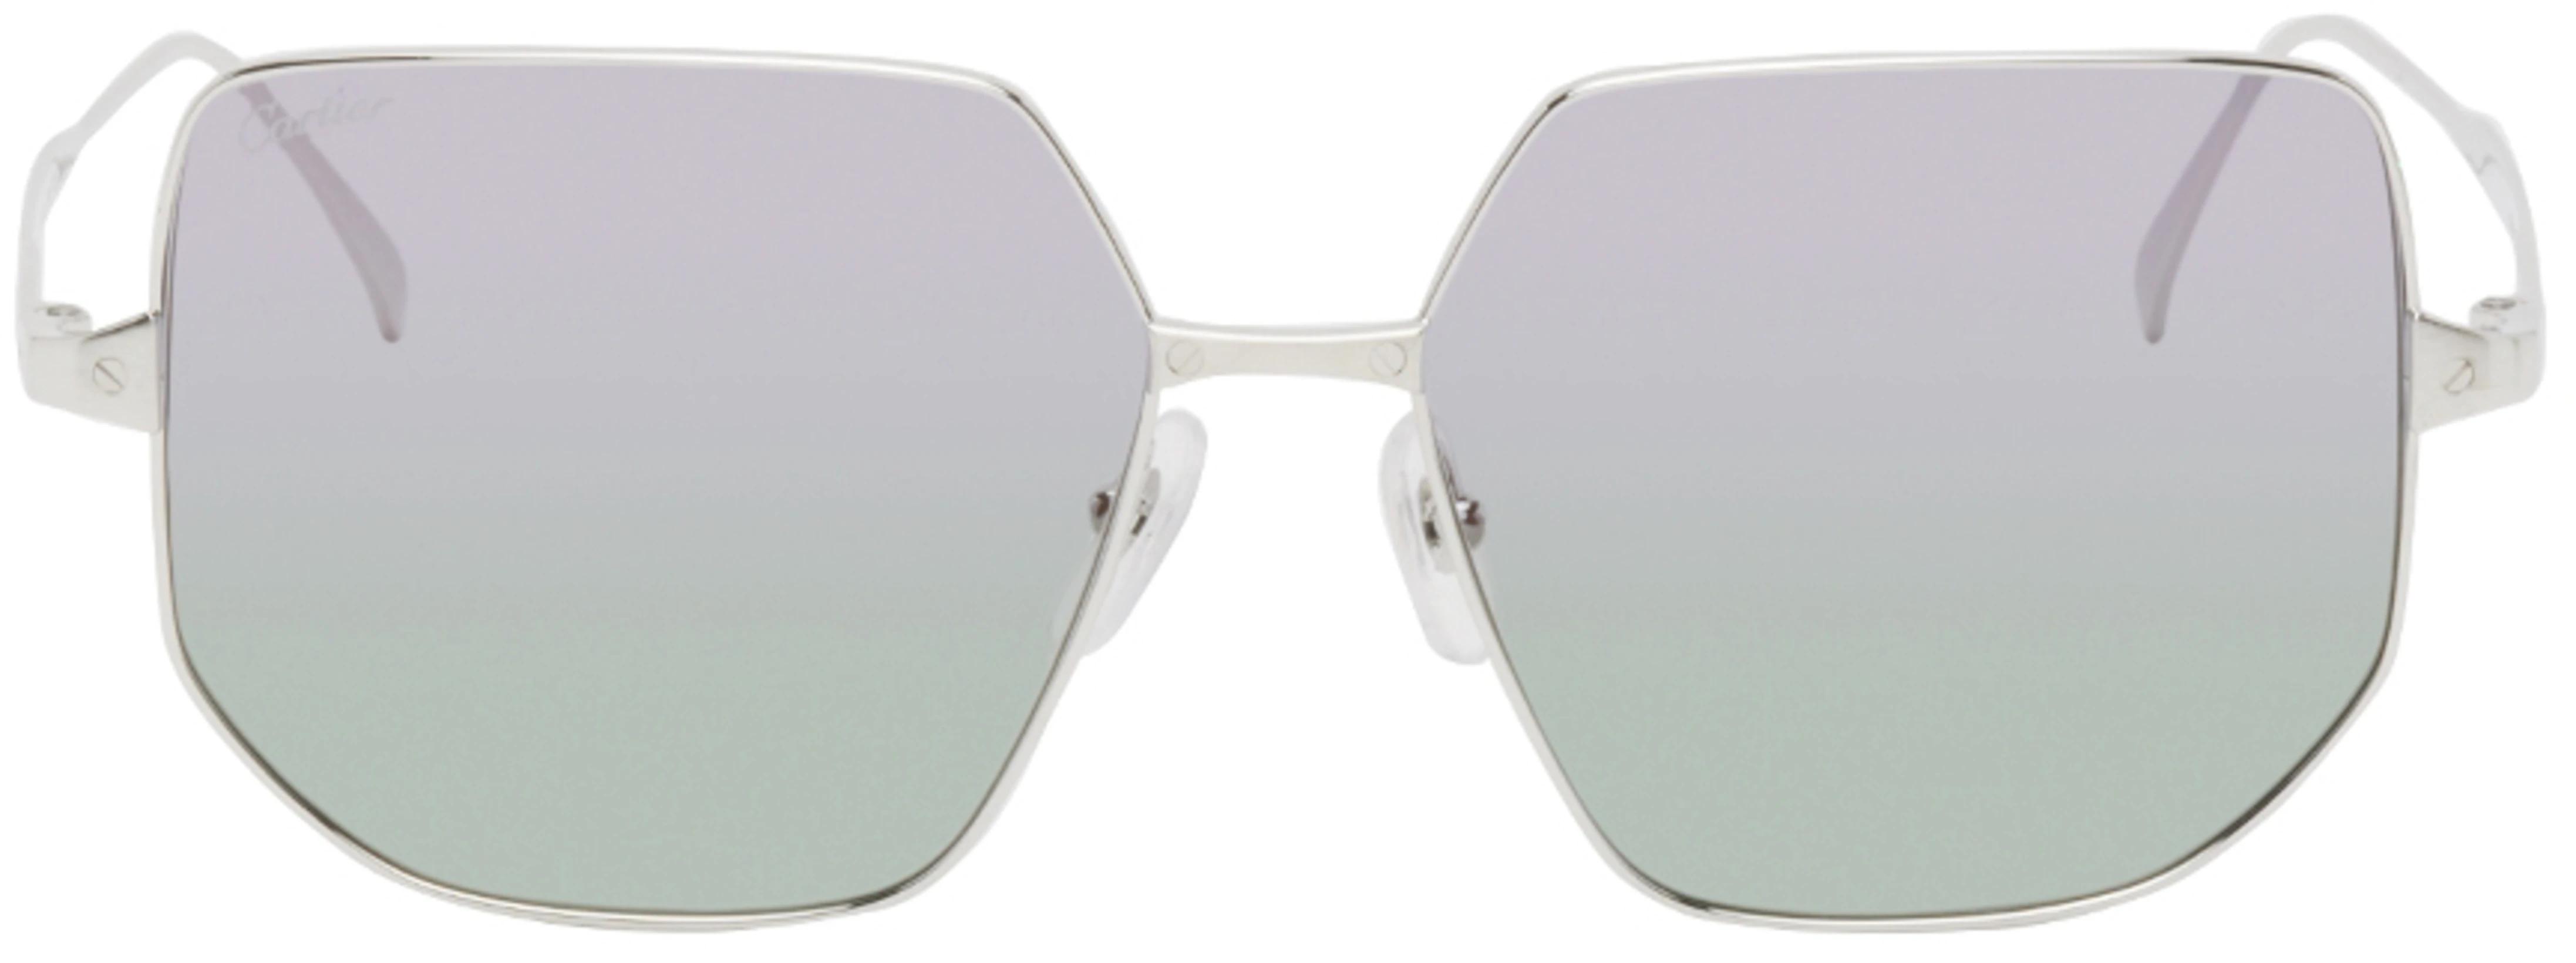 Silver Square Sunglasses by CARTIER